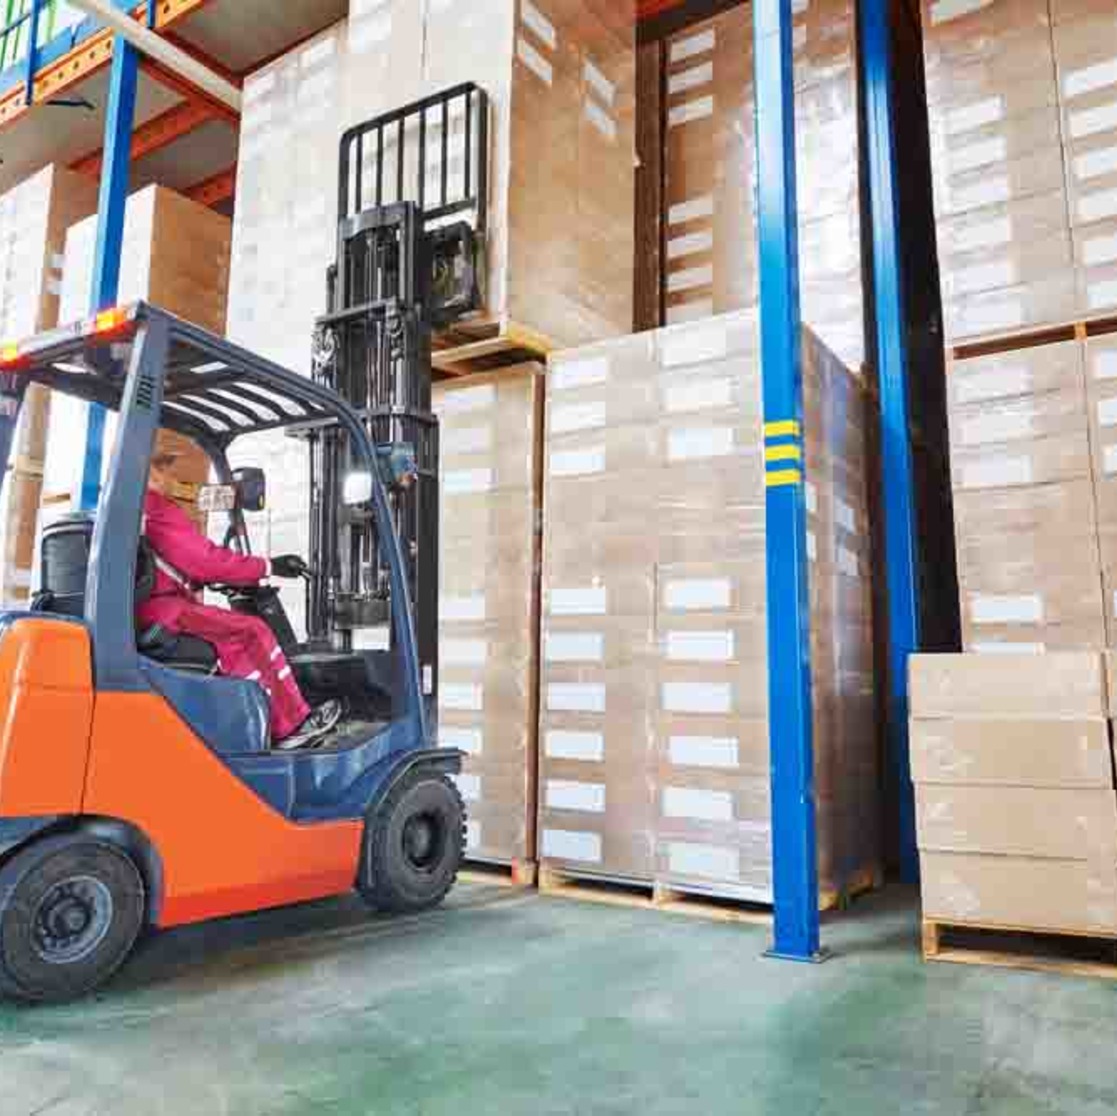 5 Ways to Organize Your Auto Shop for Productivity - Forklift Wrecker®